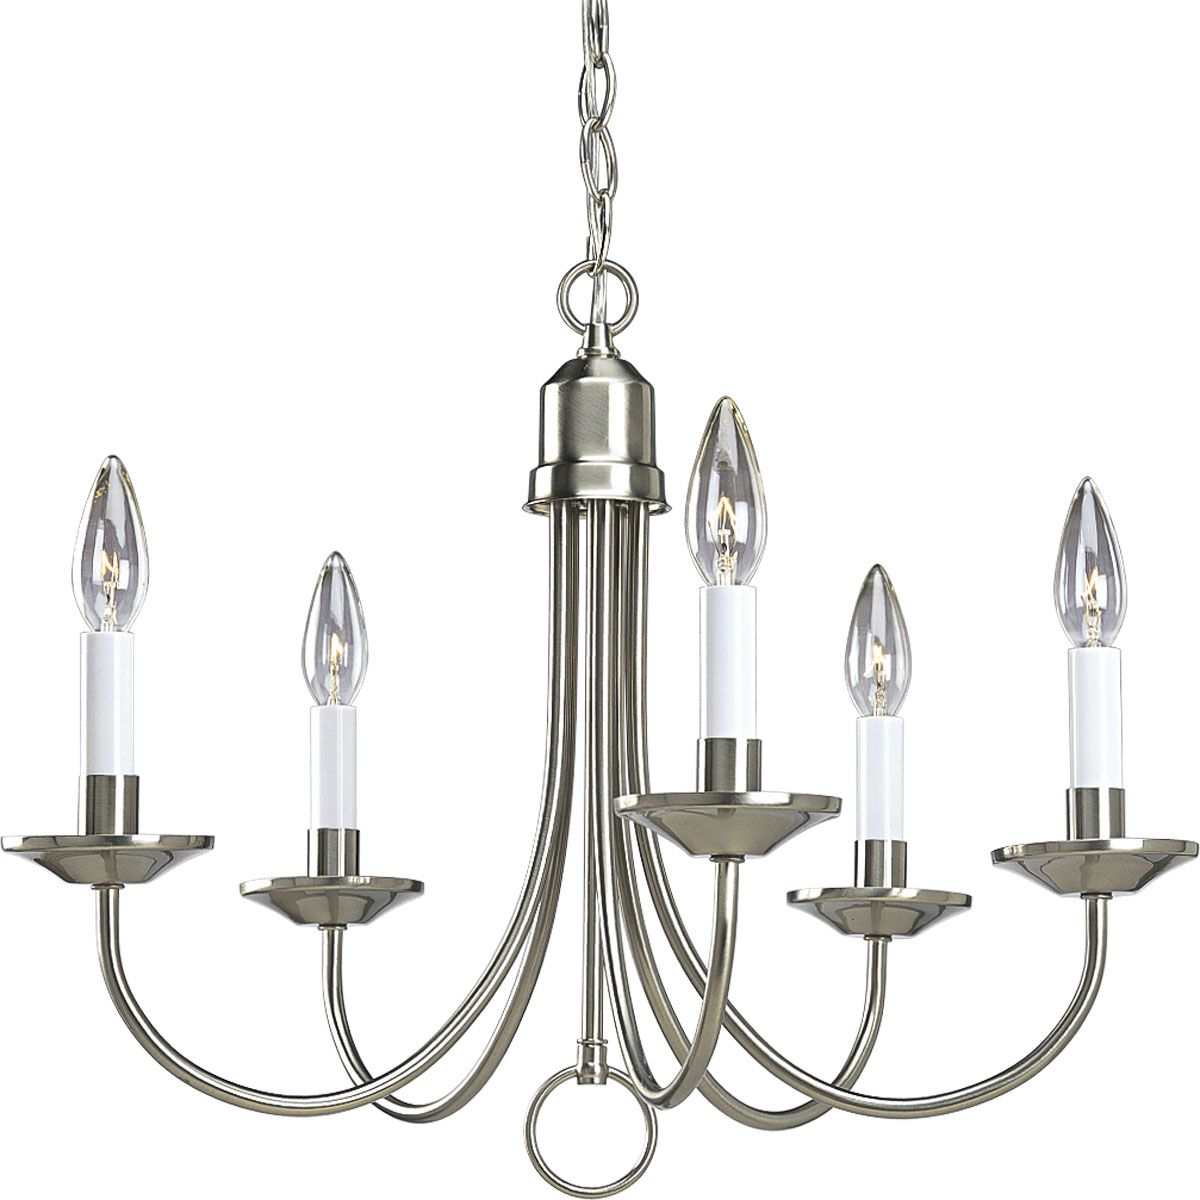 Five-Light Brushed Nickel White Candles Traditional Chandelier Light - Dry Location Listed - P4008-09